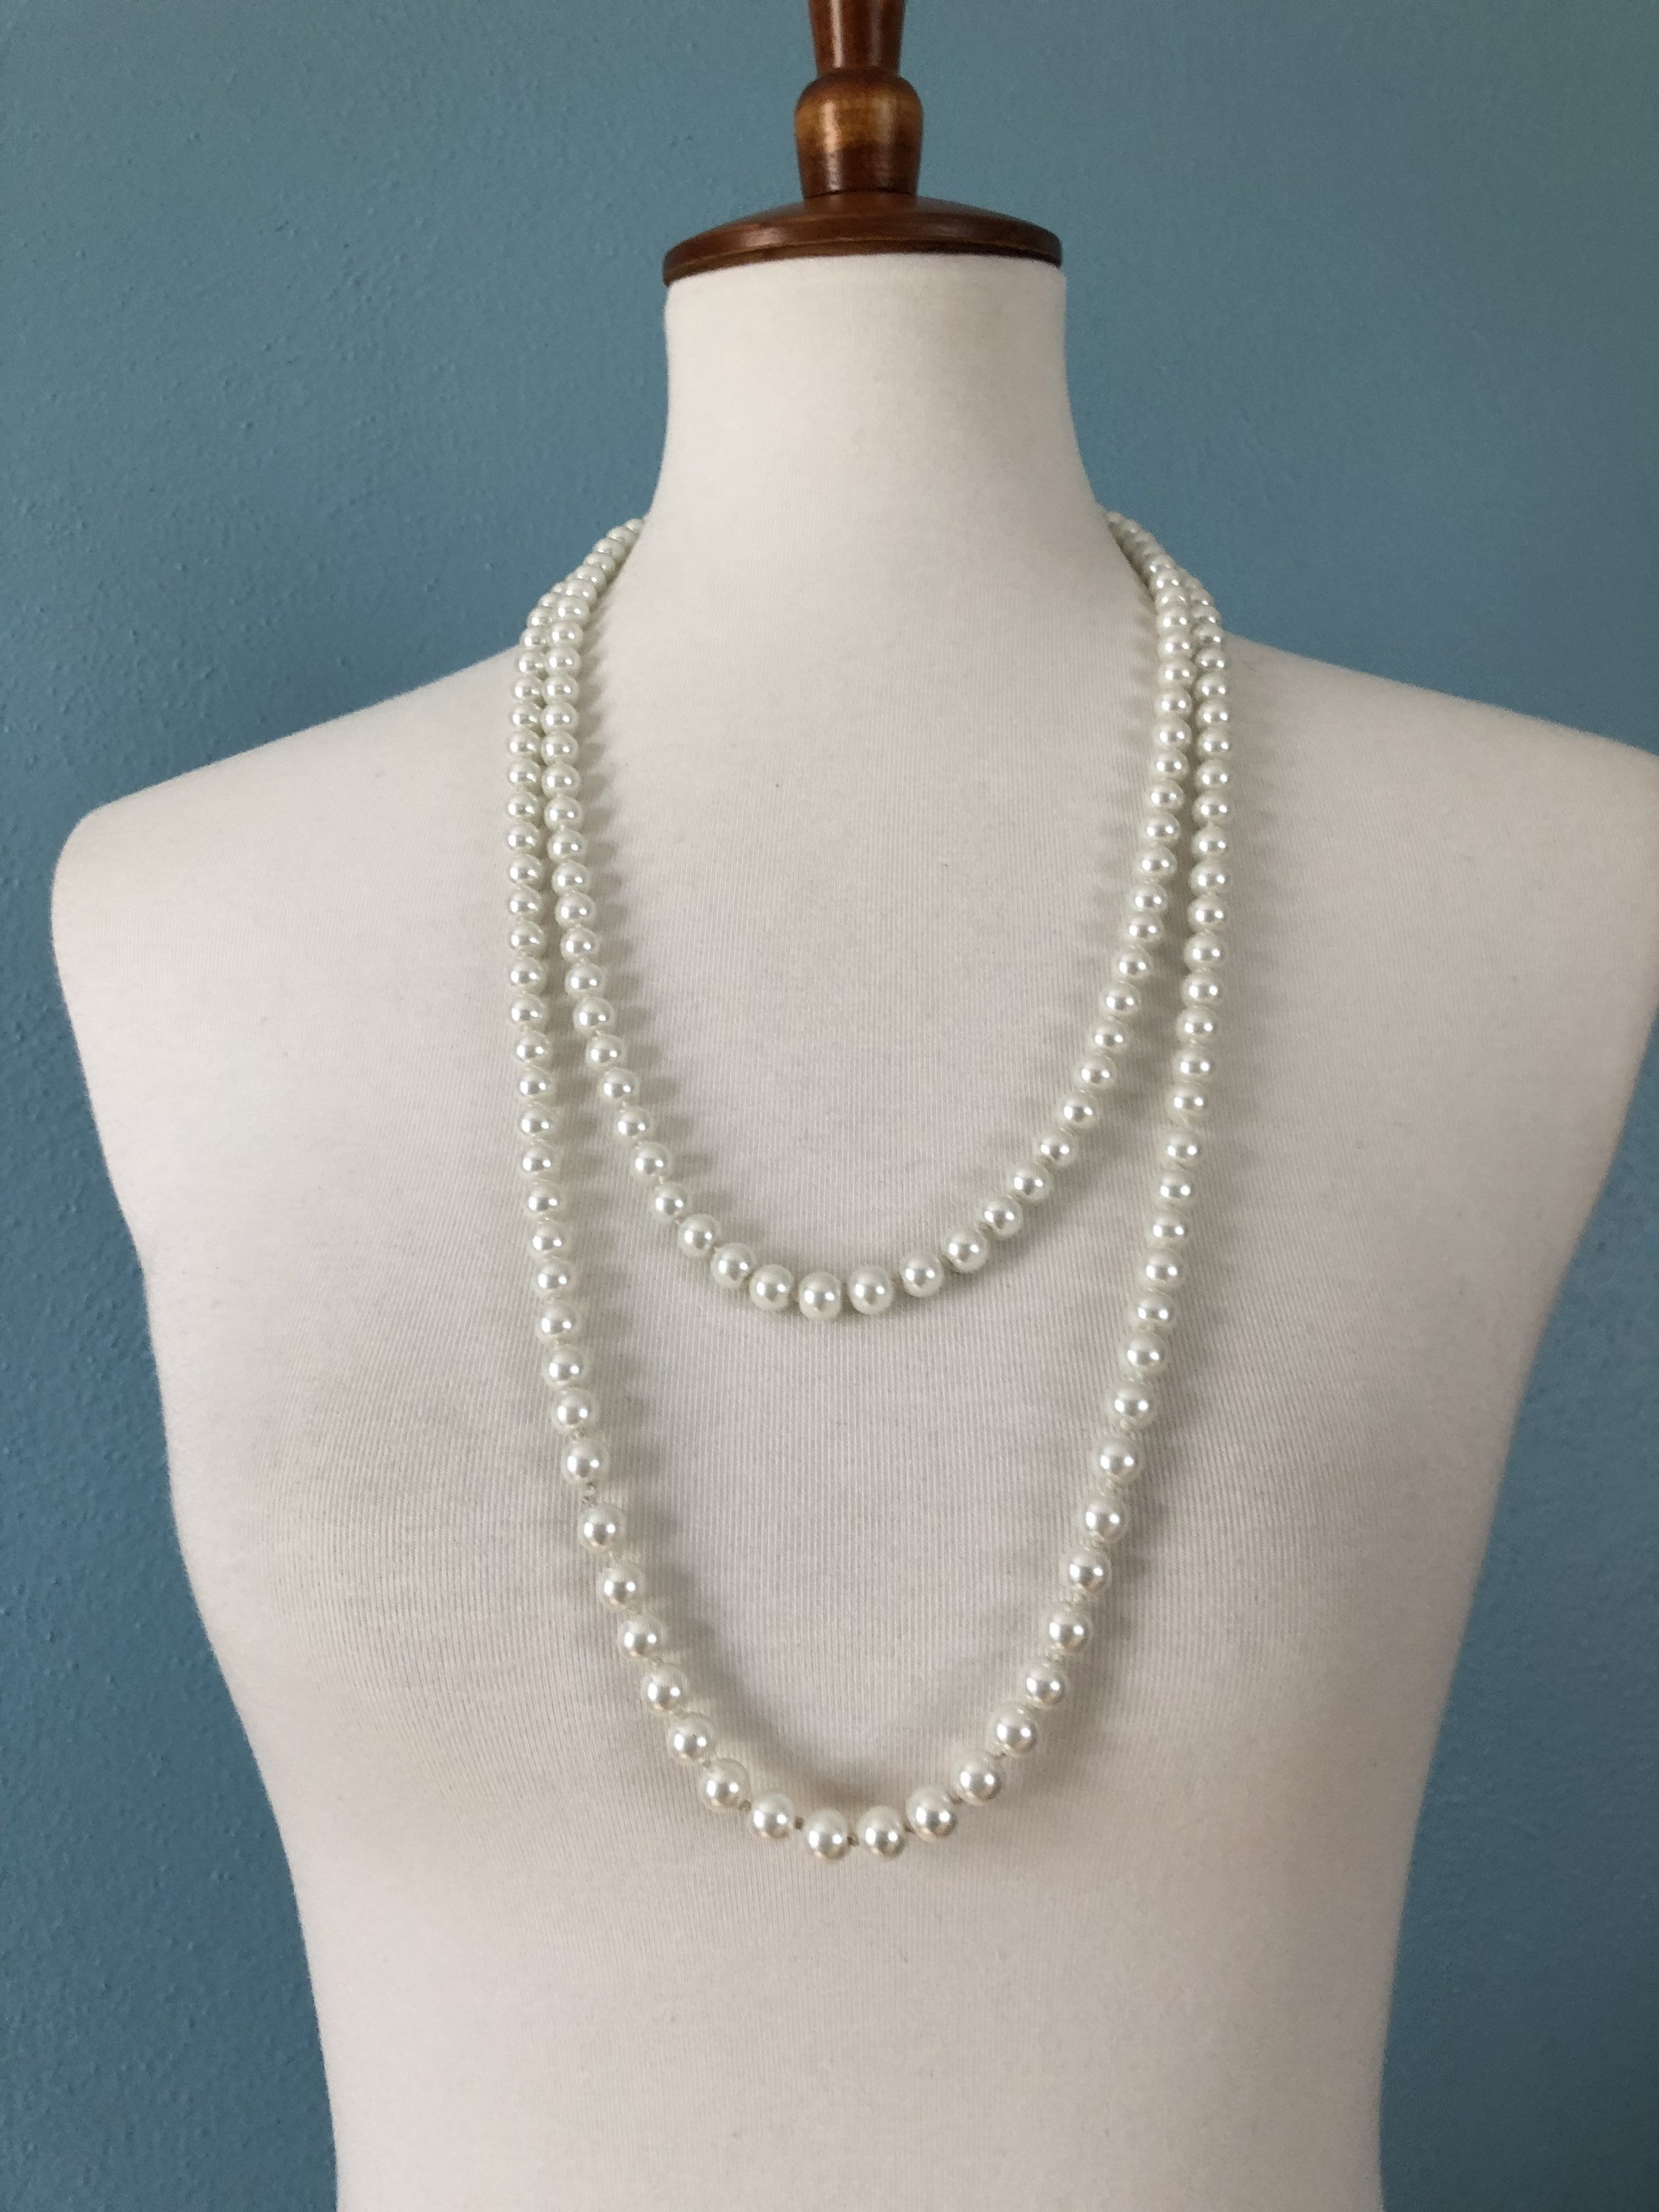 White Bead Long Necklace Flapper 1920s Style Worn at Many | Etsy